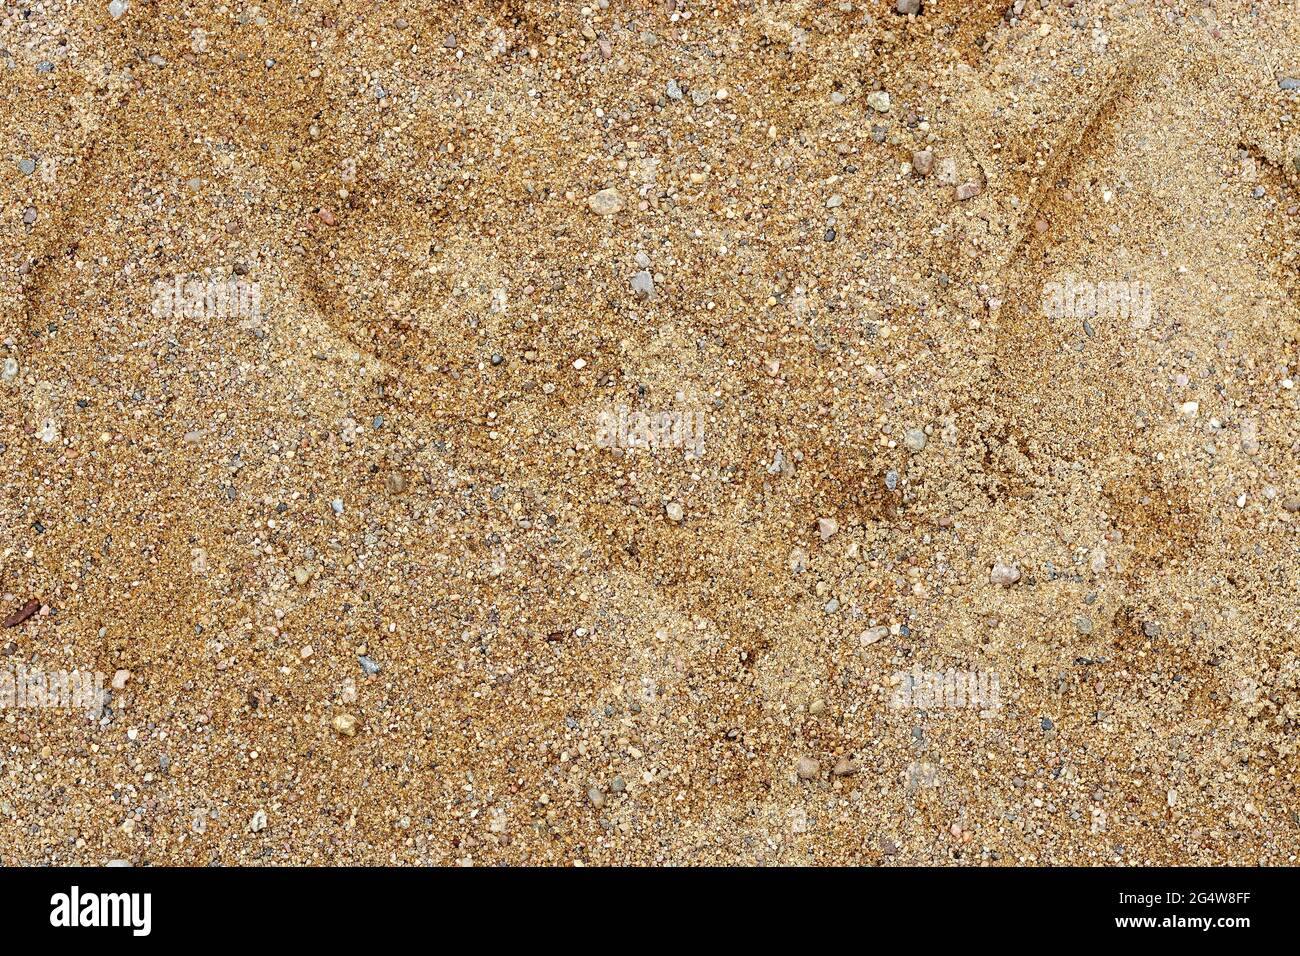 Coarse-grained yellow sand with small pebbles, for use as abstract backgrounds and textures. Stock Photo